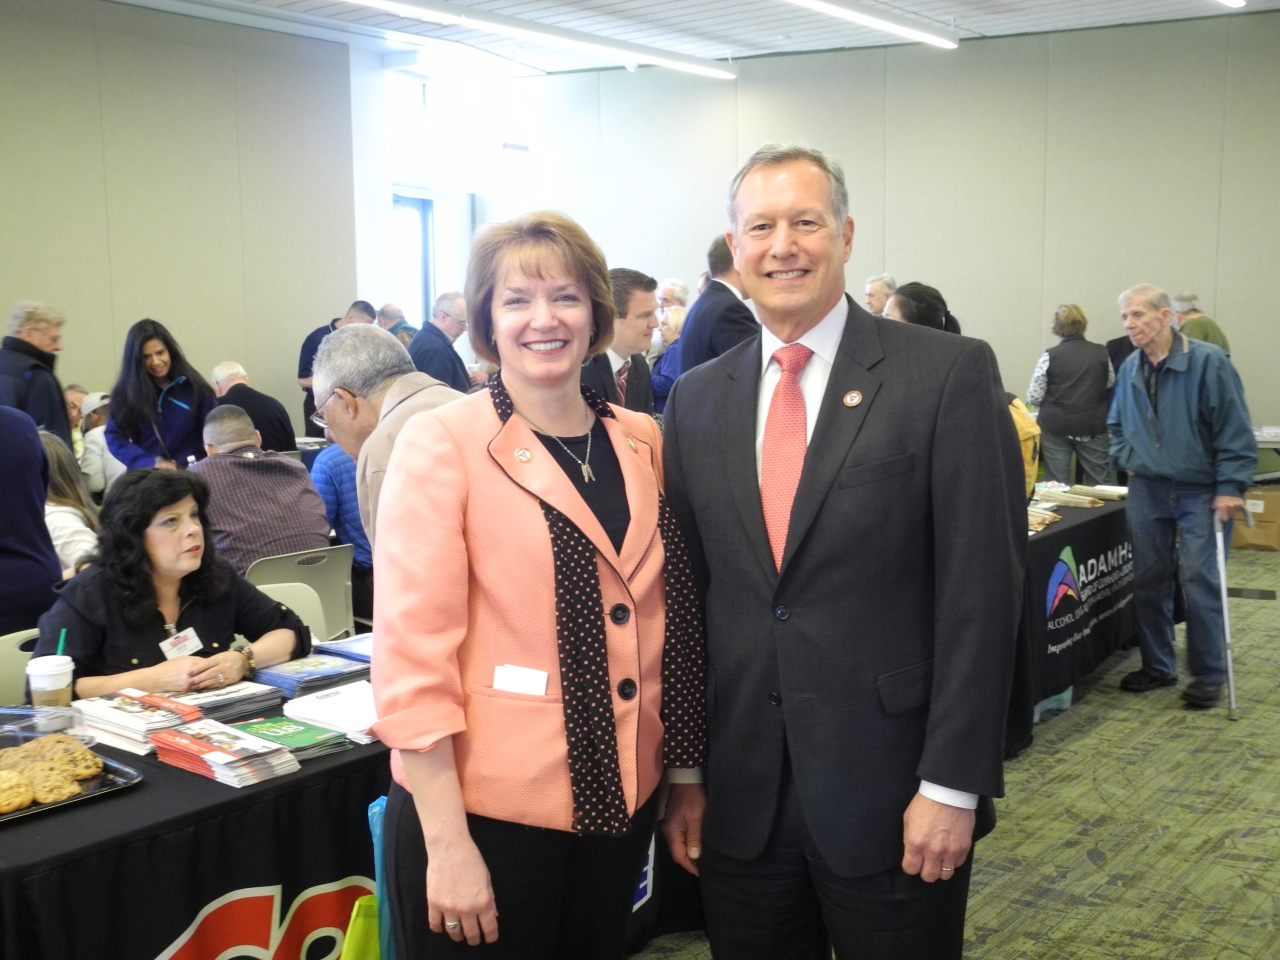 Cuyahoga County Veterans Attend Resource Fair Sponsored by State Rep. Anielski